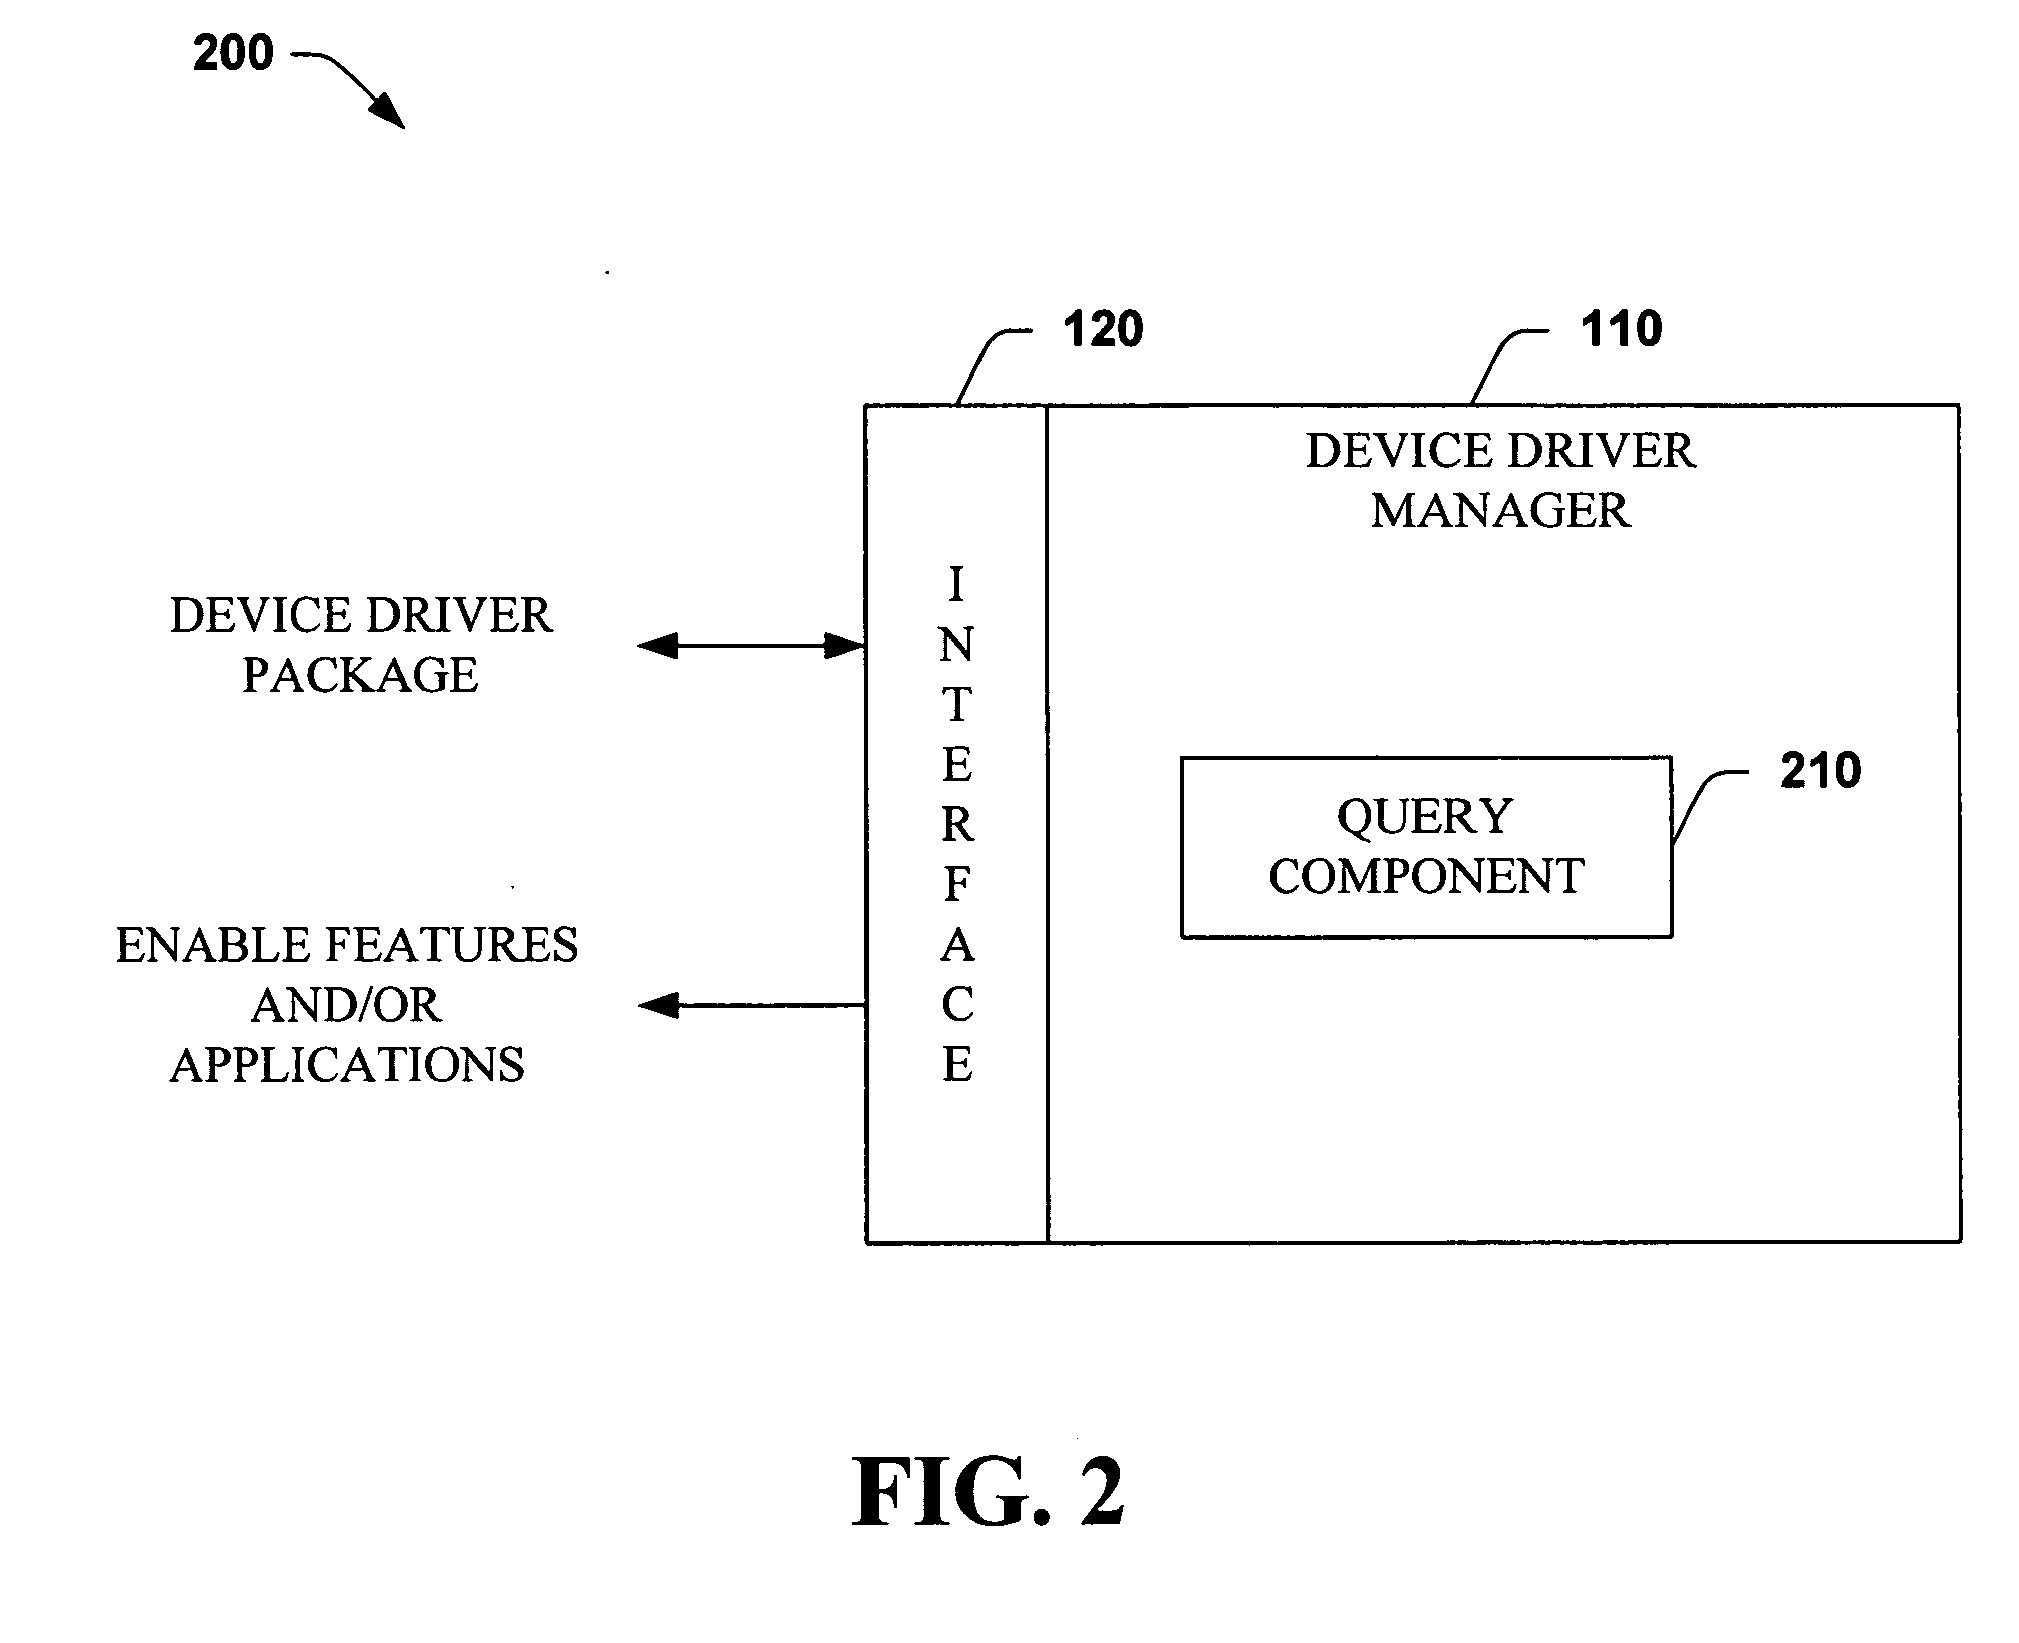 Systems and methods that facilitate selective enablement of a device driver feature(s) and/or application(s)